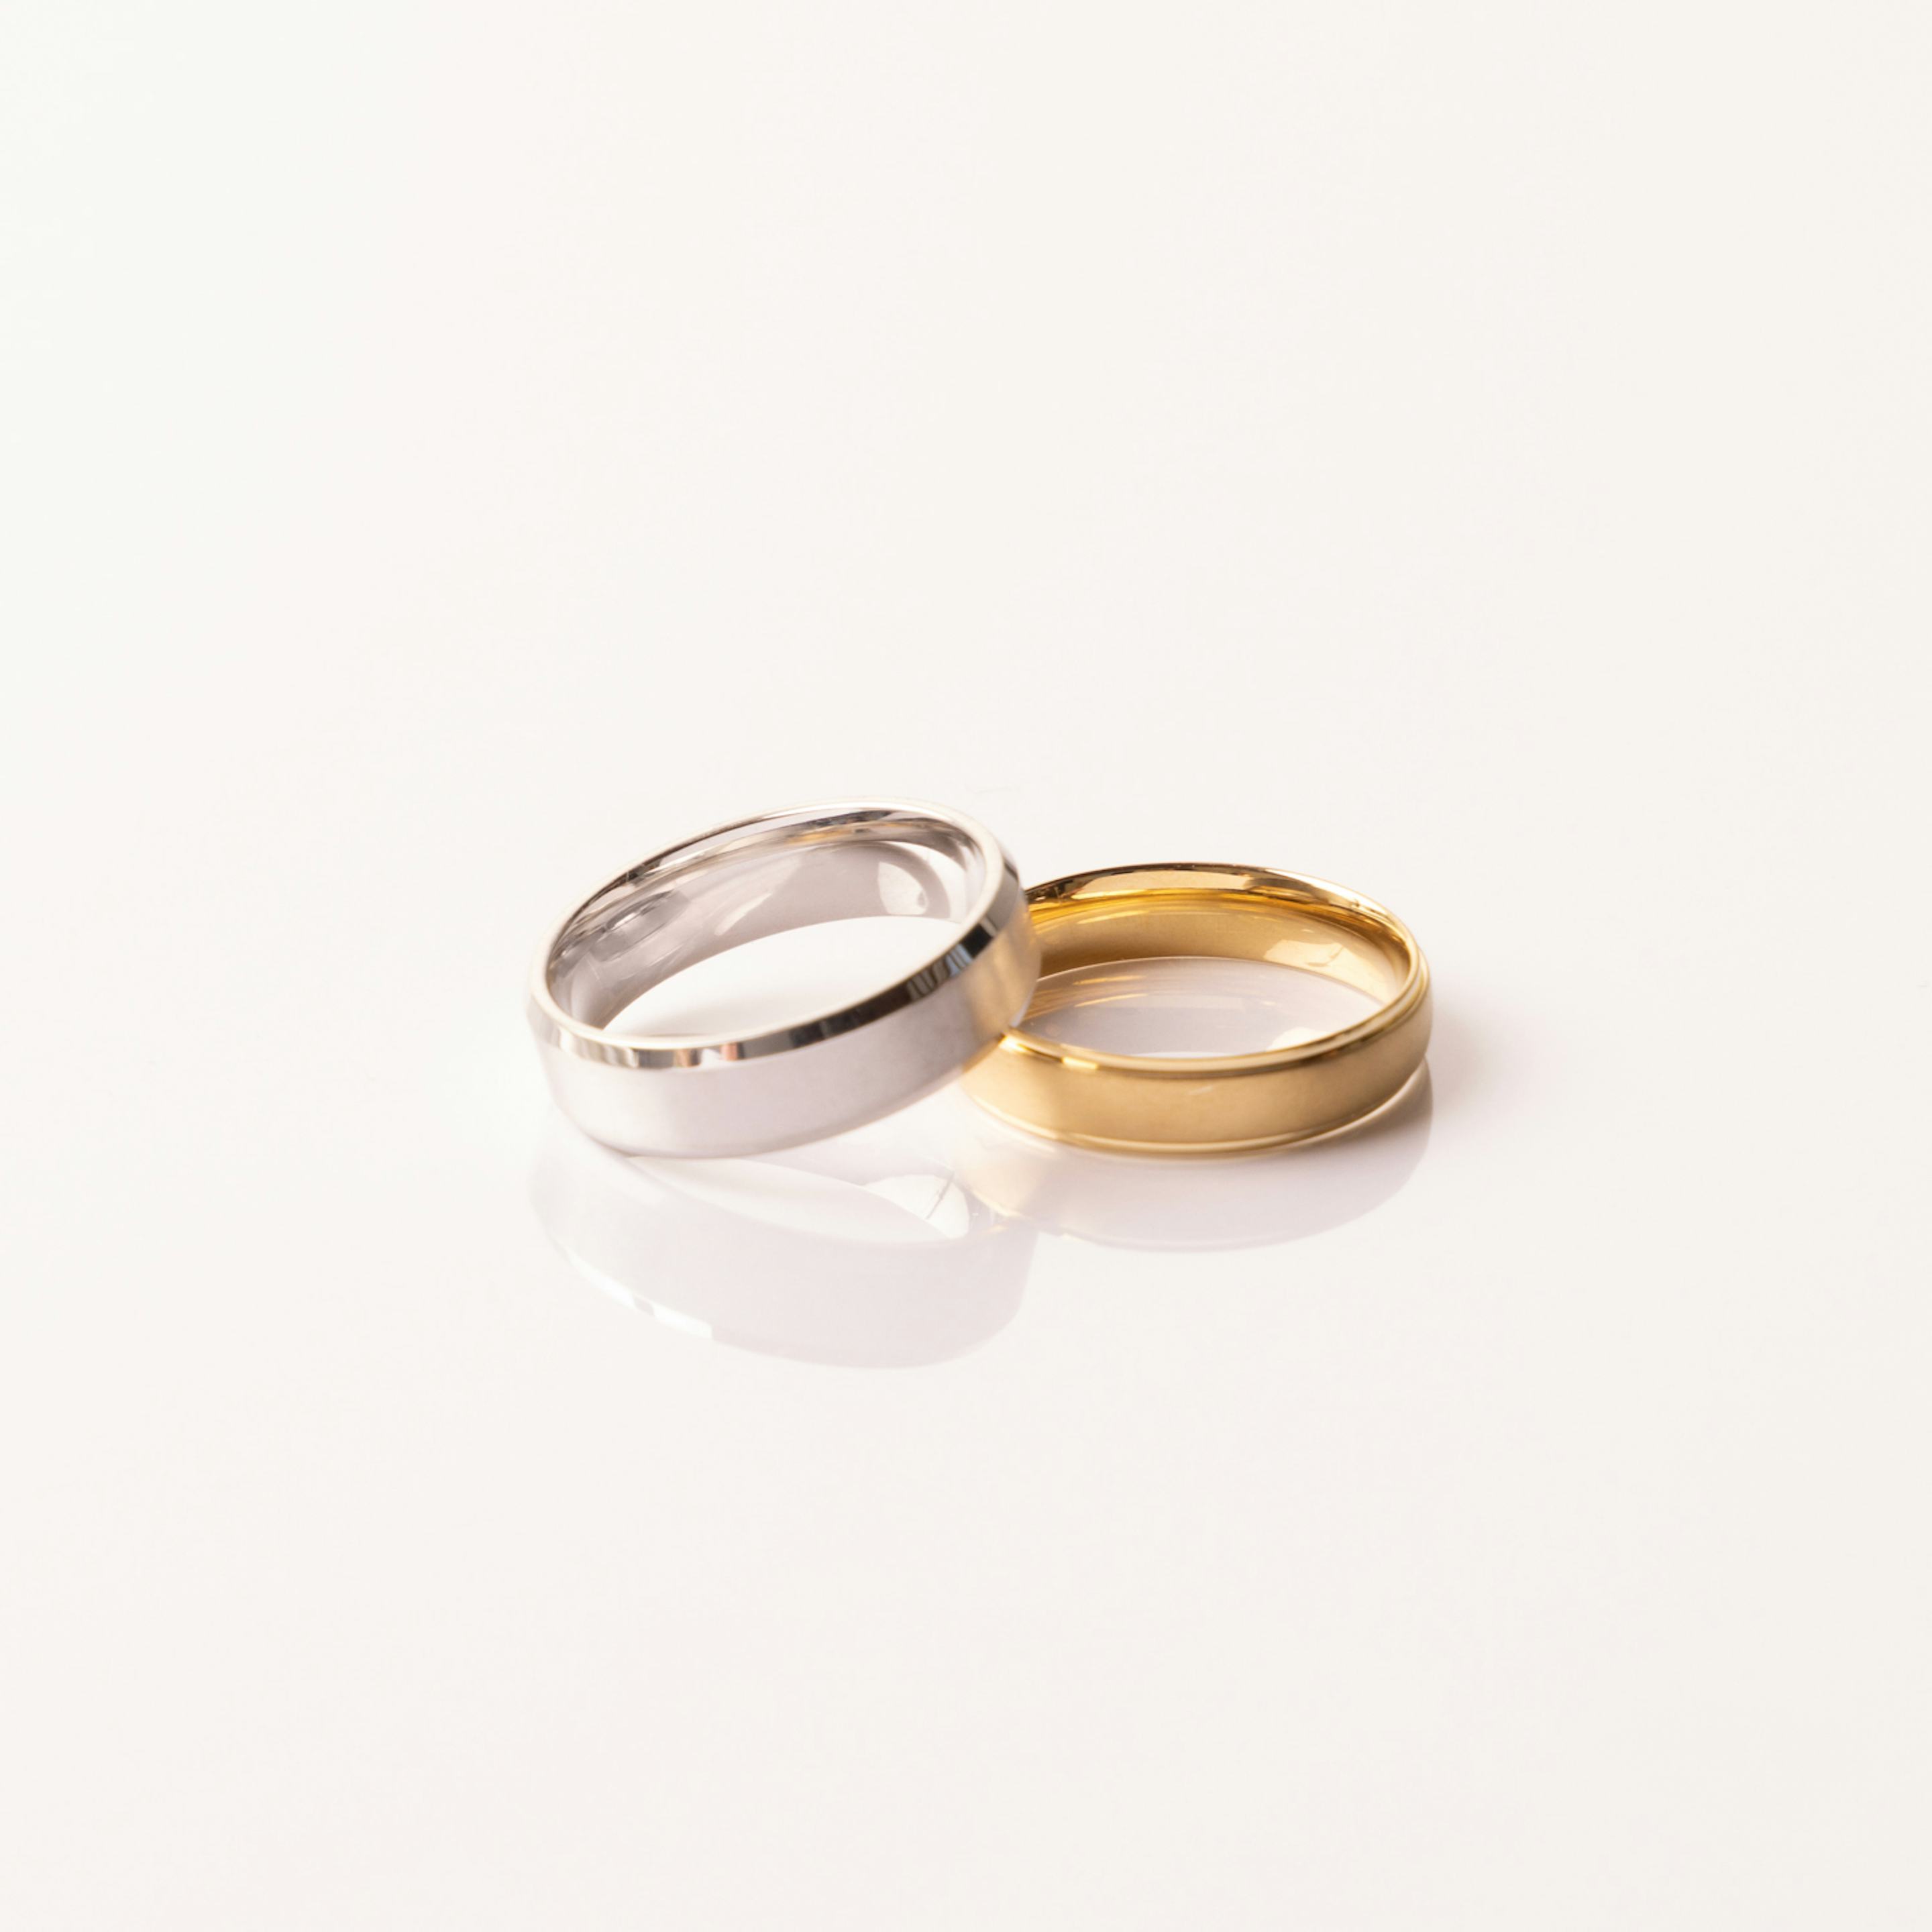 The Brushed Bevel Band | 18k | 18k Yellow Gold